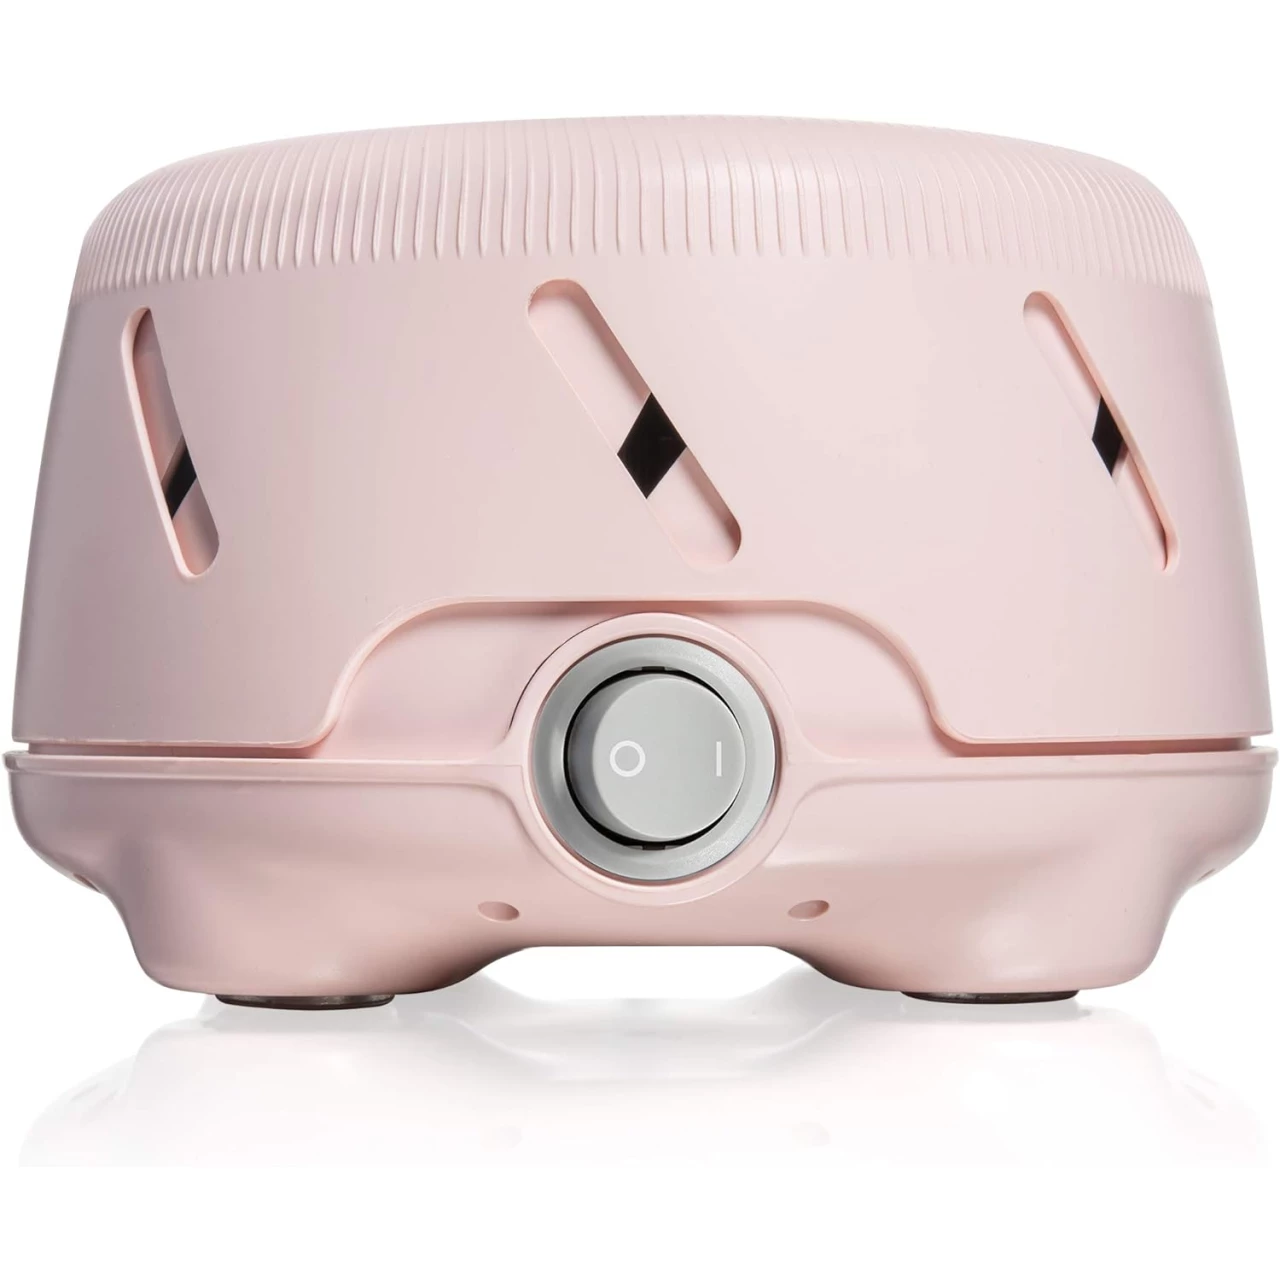 Yogasleep Dohm Uno White Noise Sound Machine, Natural Pink Noise from a Real Fan, Adjustable Tone &amp; Noise Canceling for Office Privacy &amp; Meditation, Sleep Aid for Travel, Baby &amp; Adults (Pink)